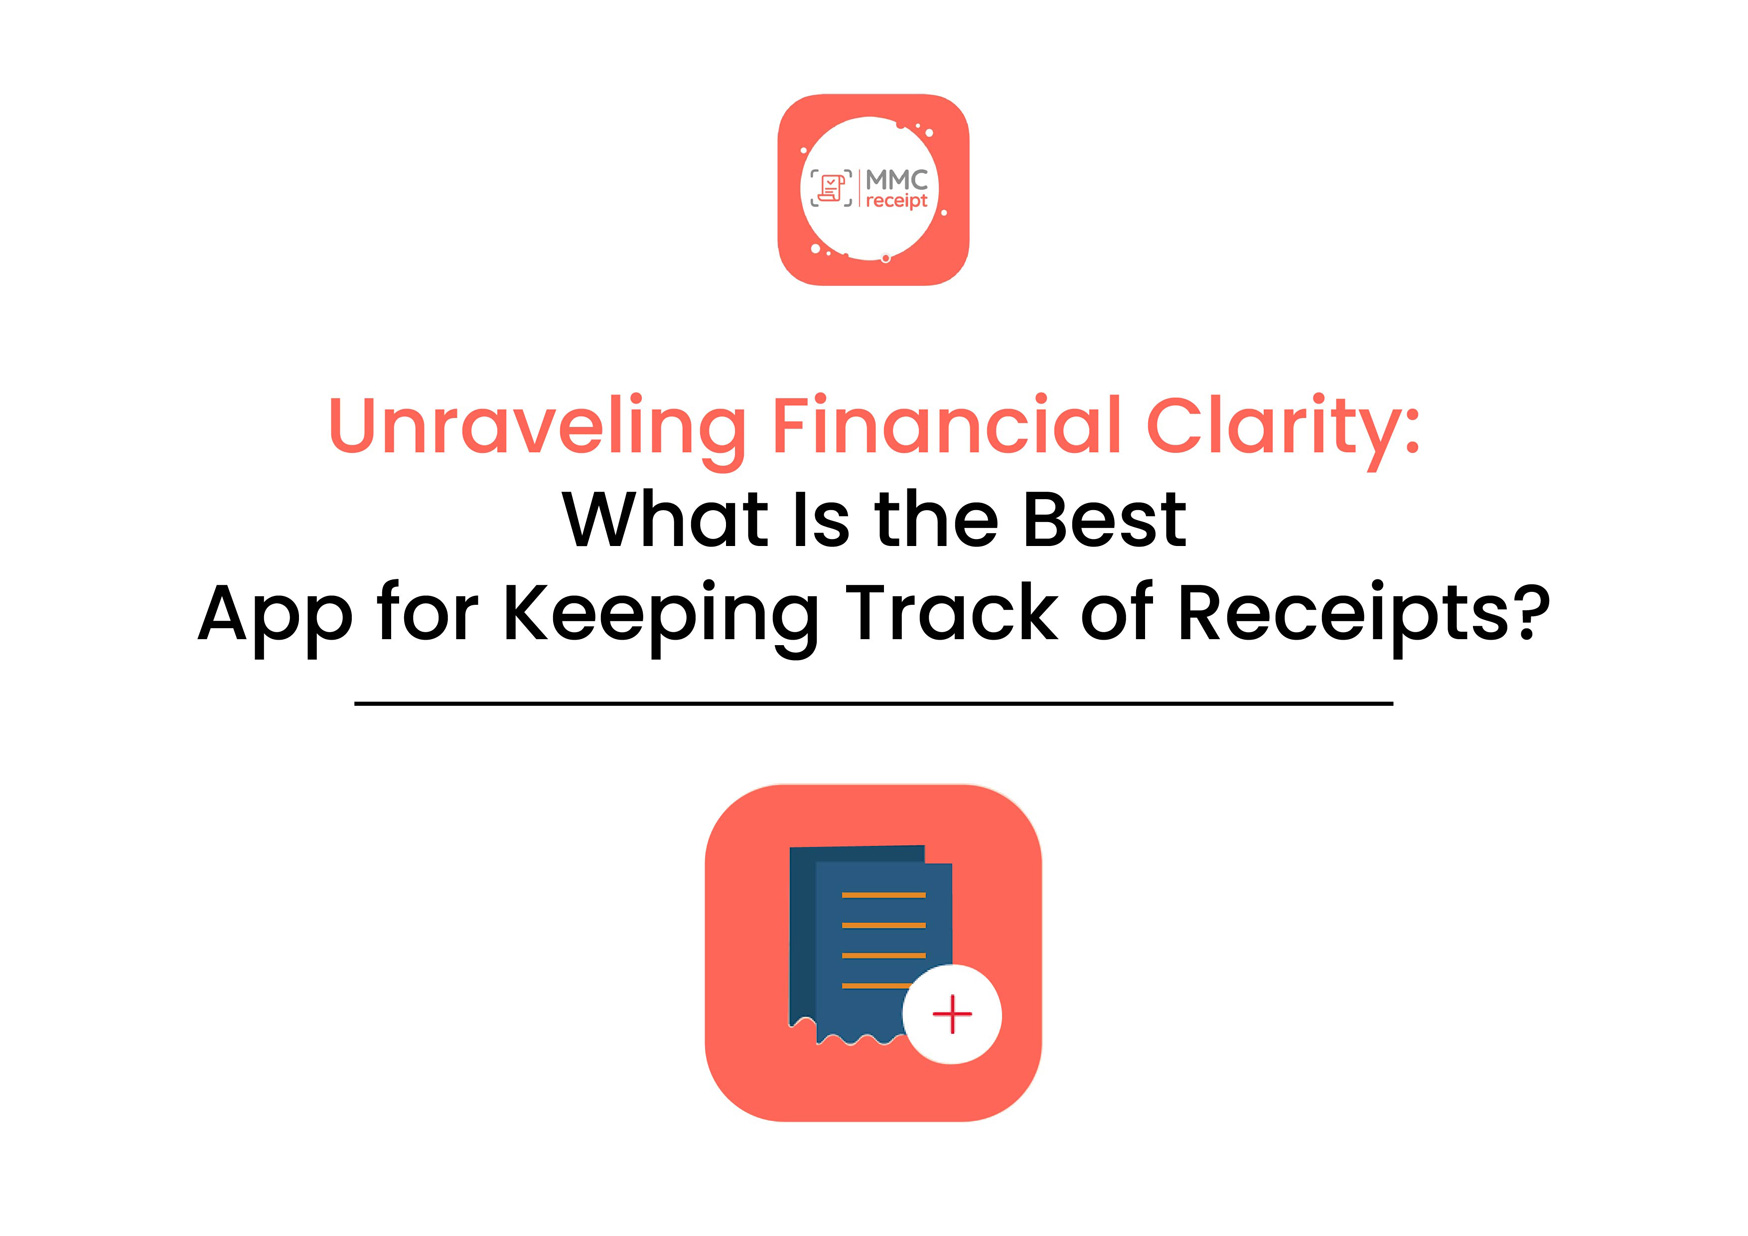 Unraveling Financial Clarity: What Is the Best App for Keeping Track of Receipts?